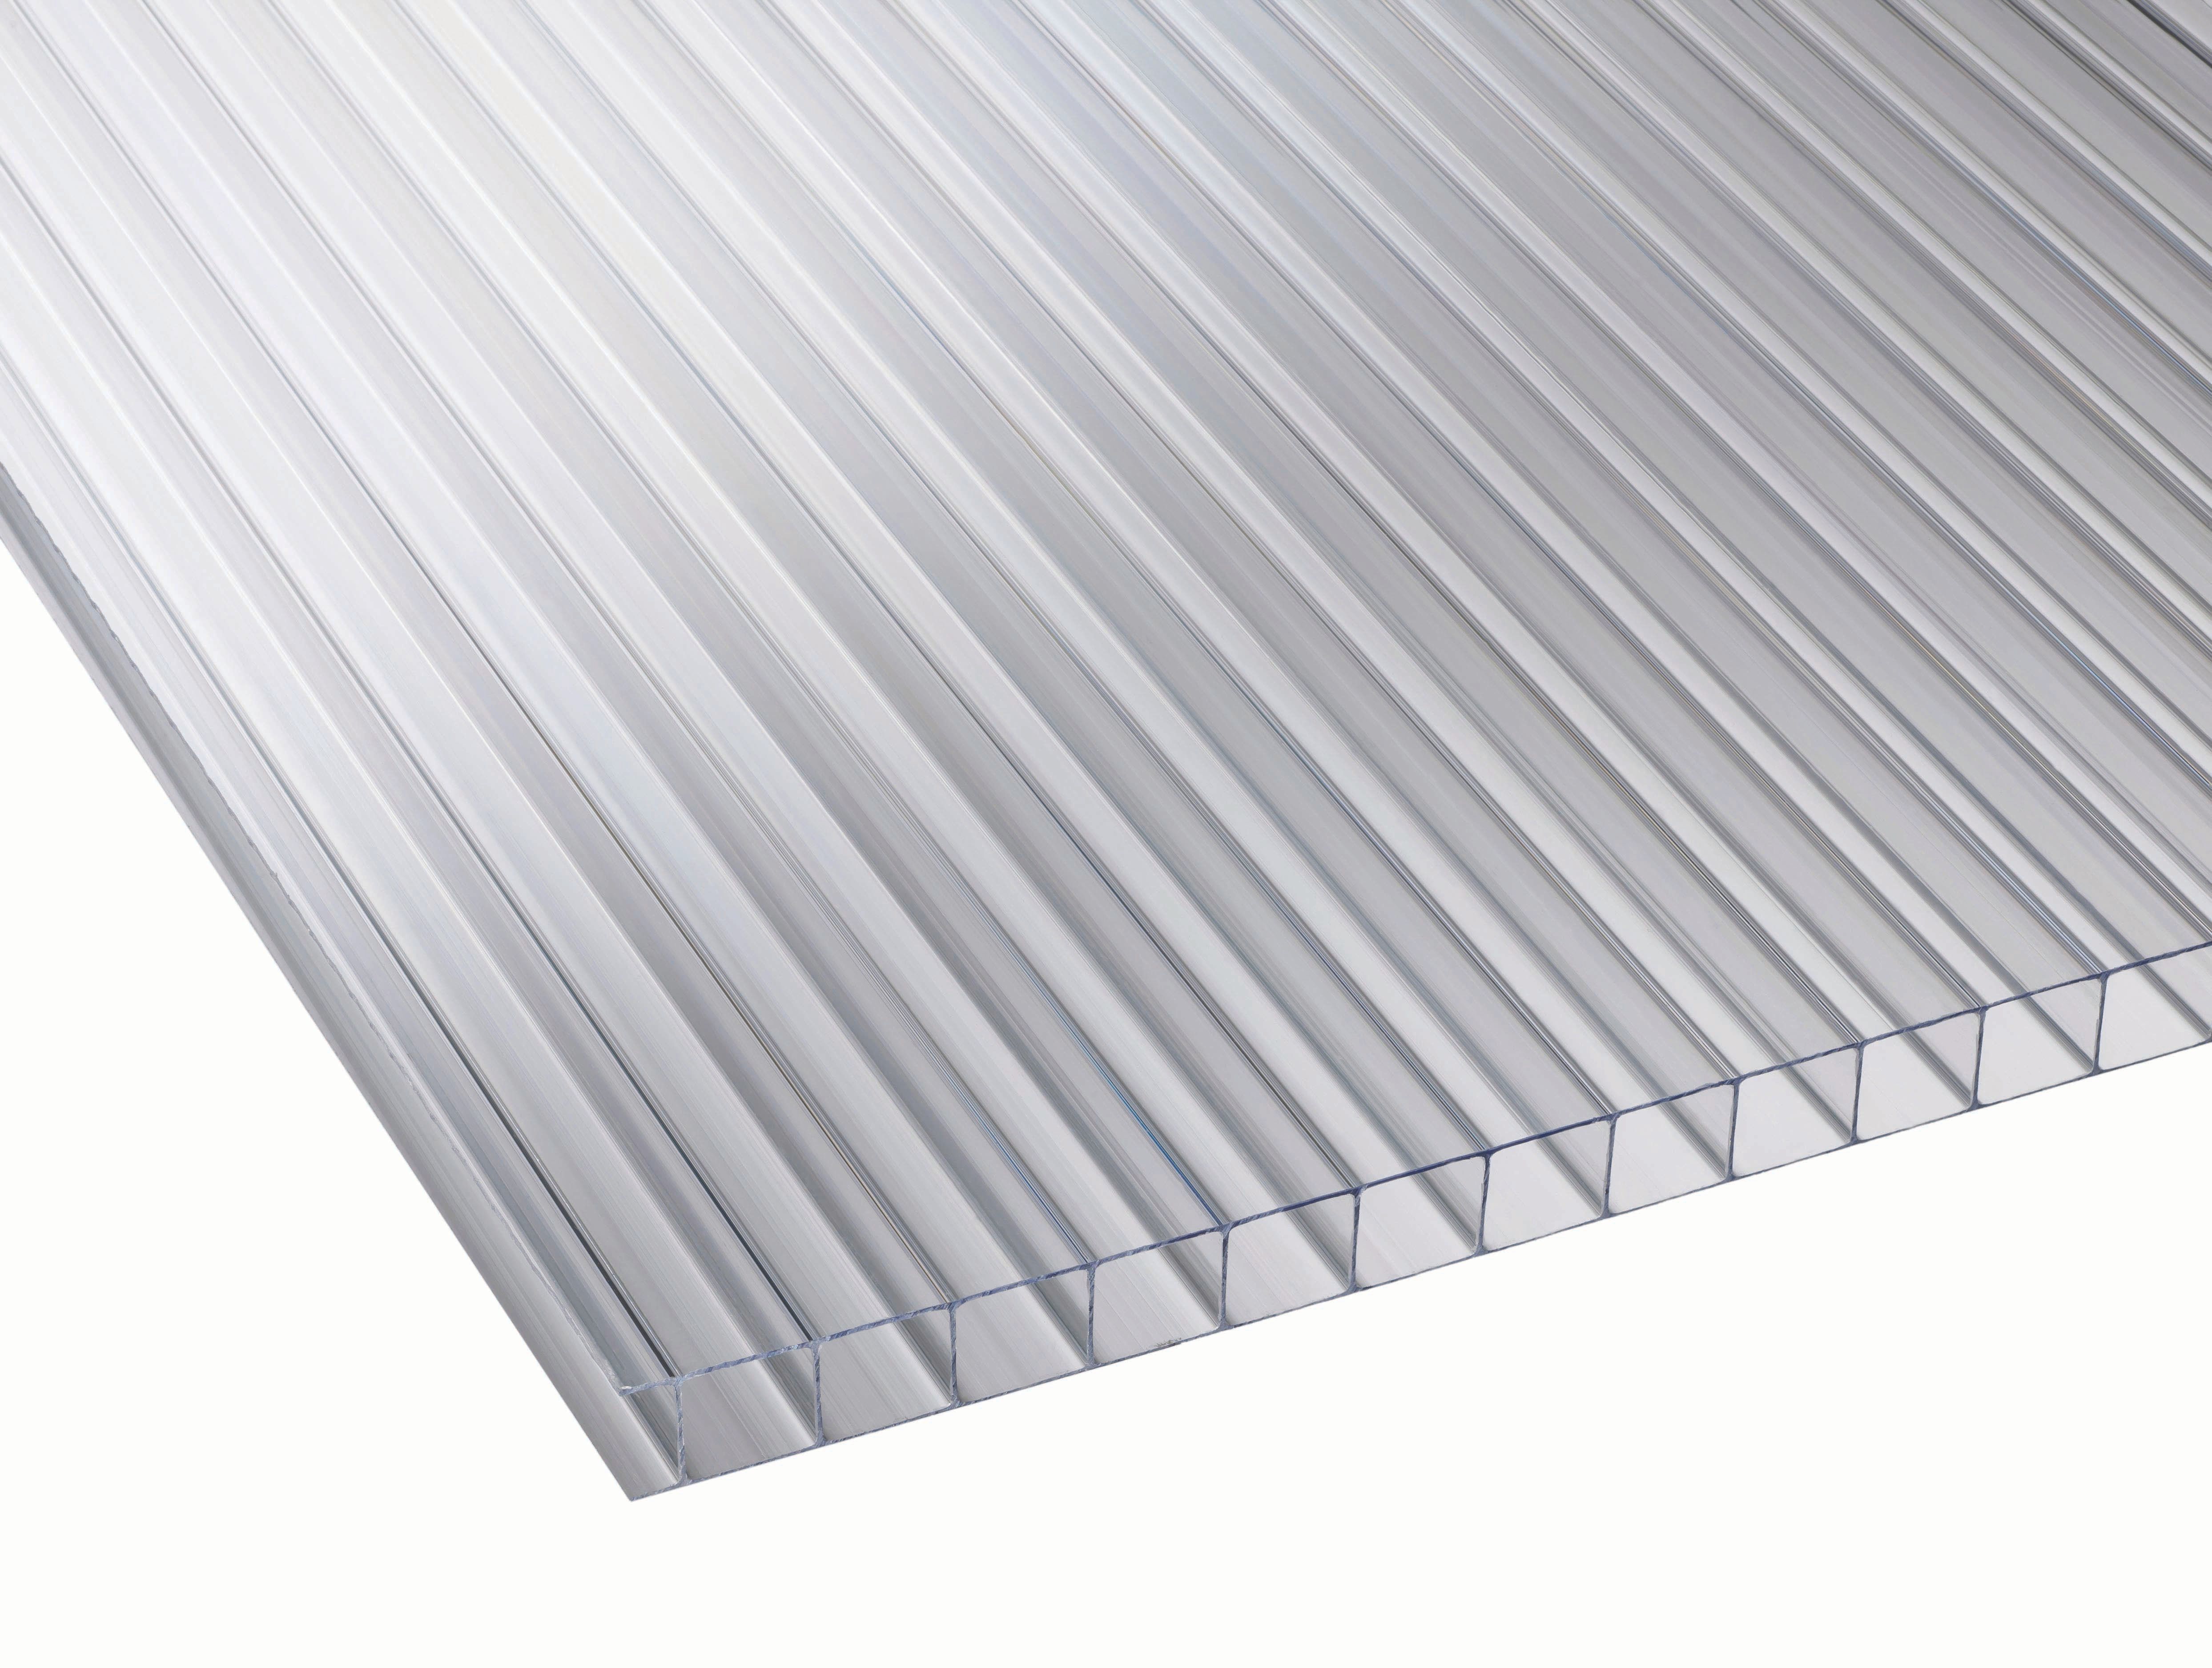 Image of 10mm Clear Multiwall Polycarbonate Sheet - 2500 x 2100mm